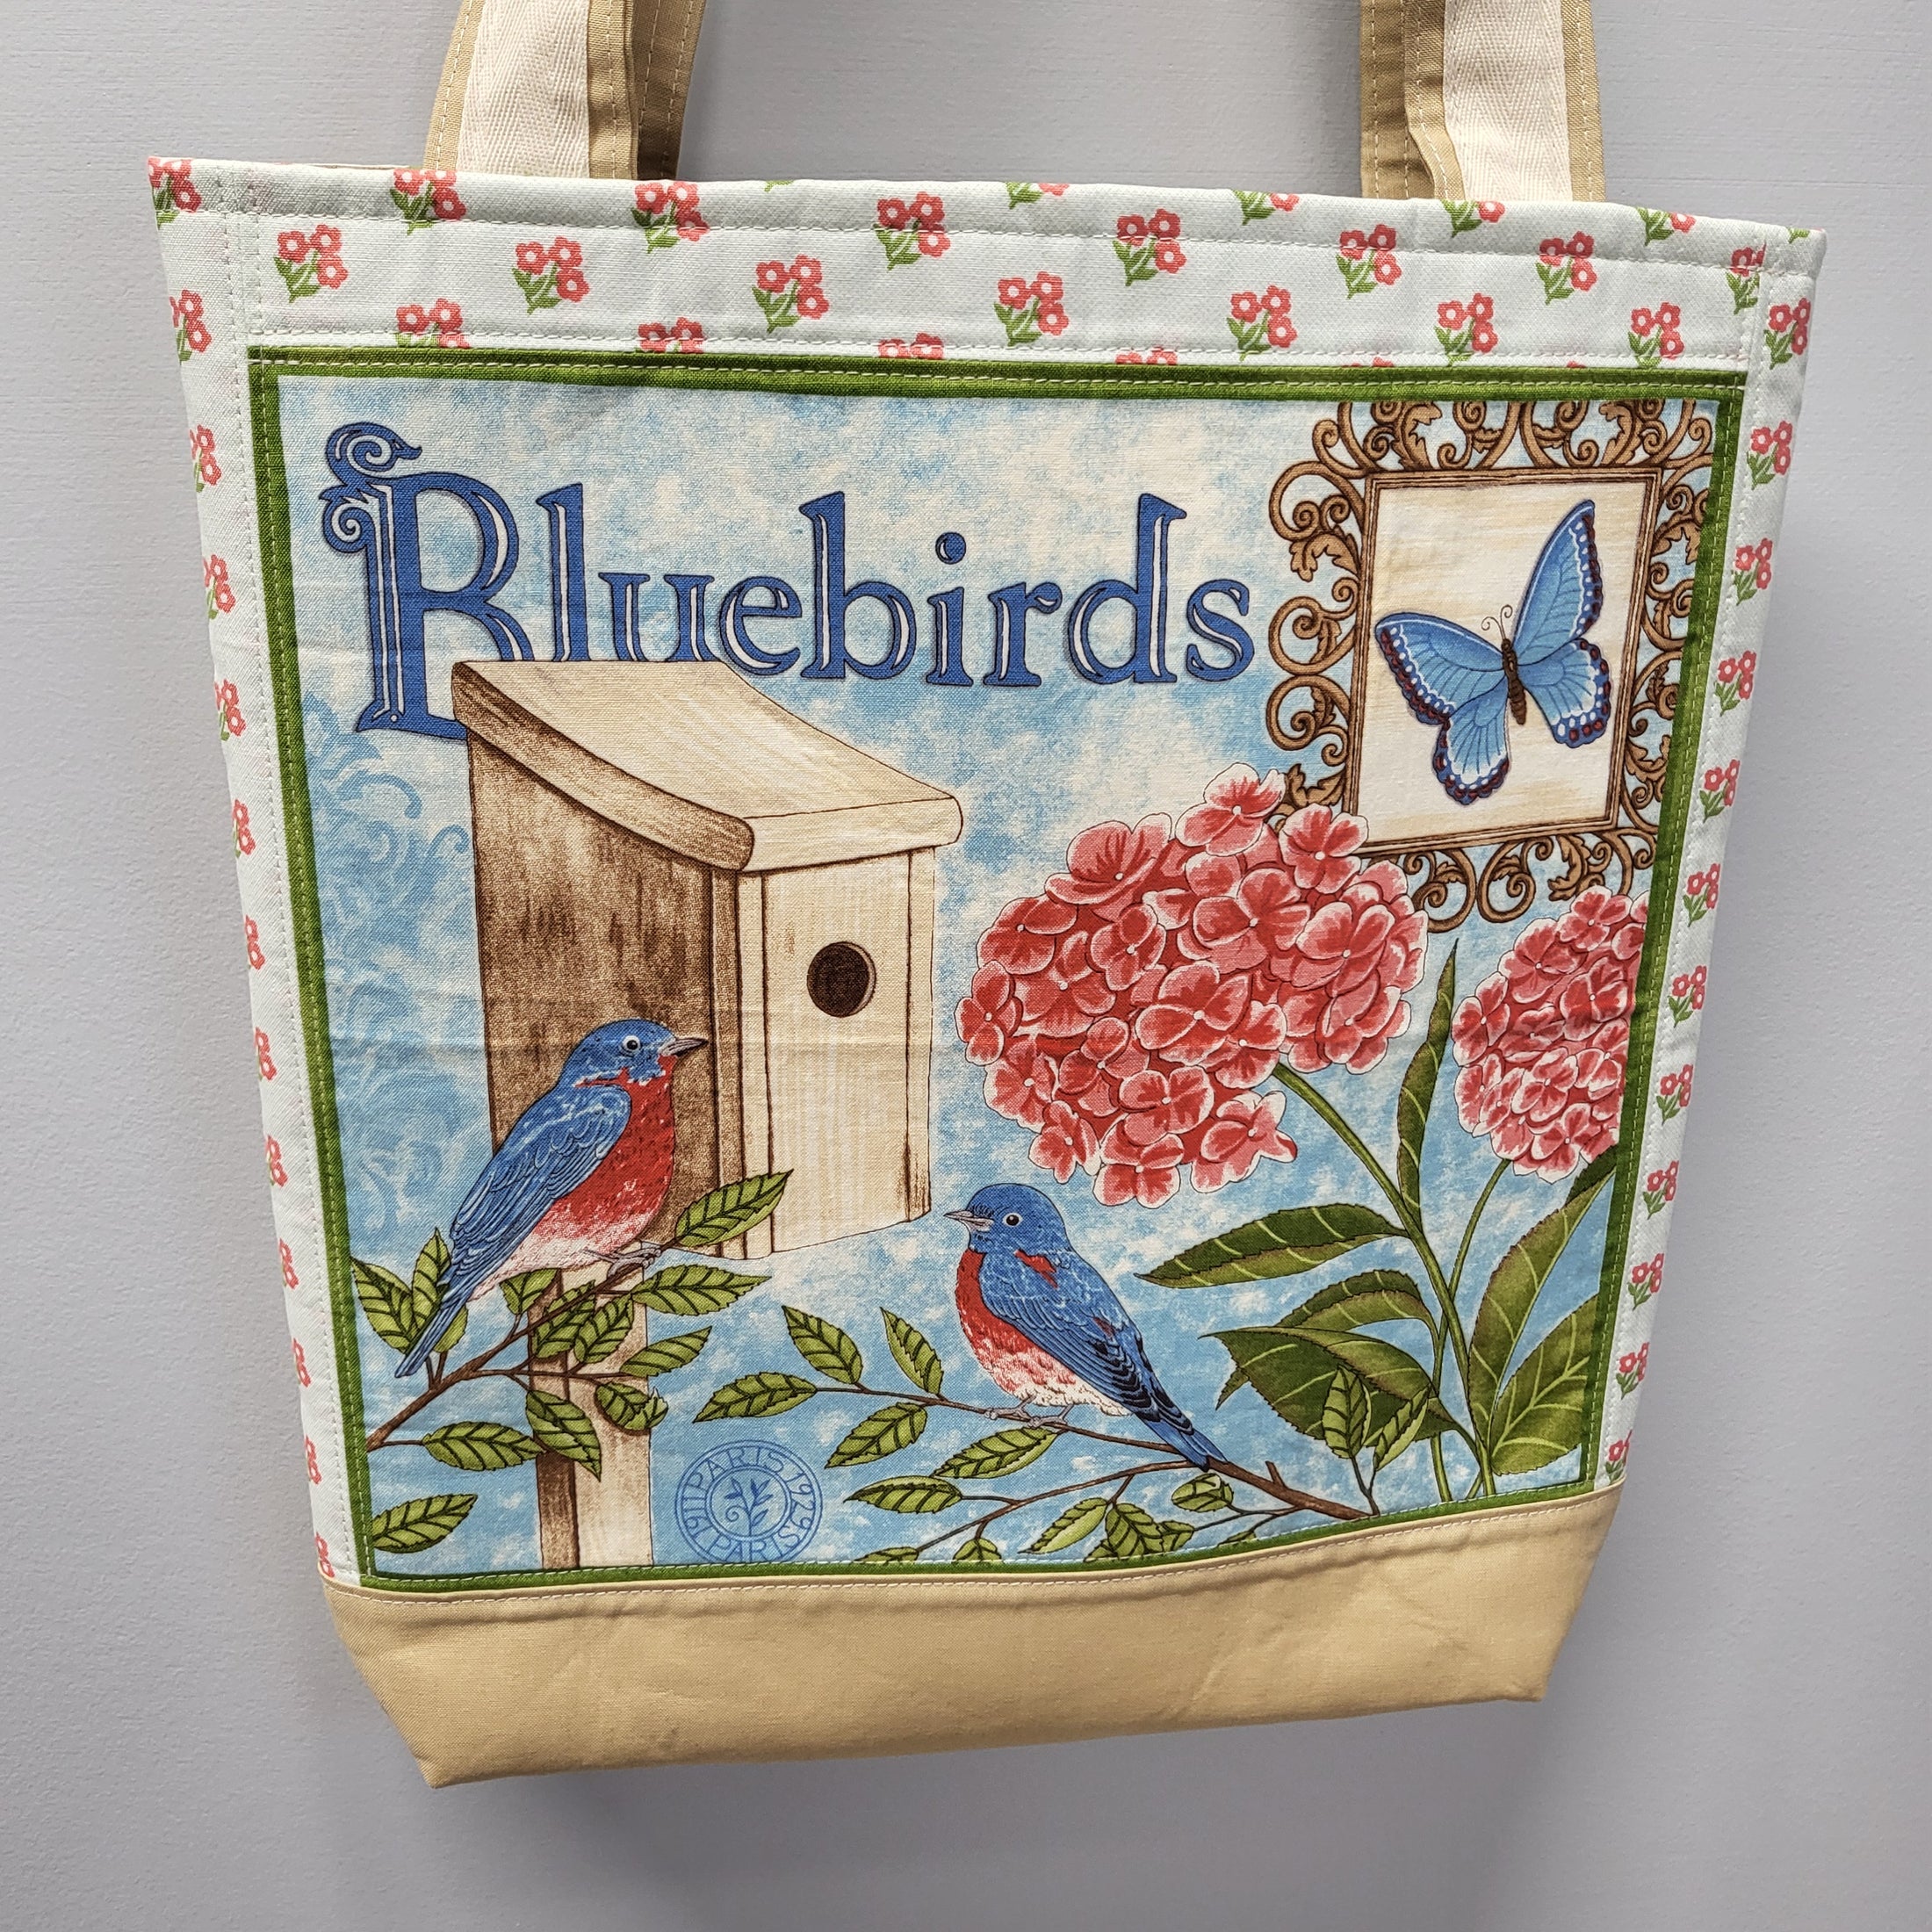 Bluebirds panel tote bag with tan bottom and tiny flowers on back. 